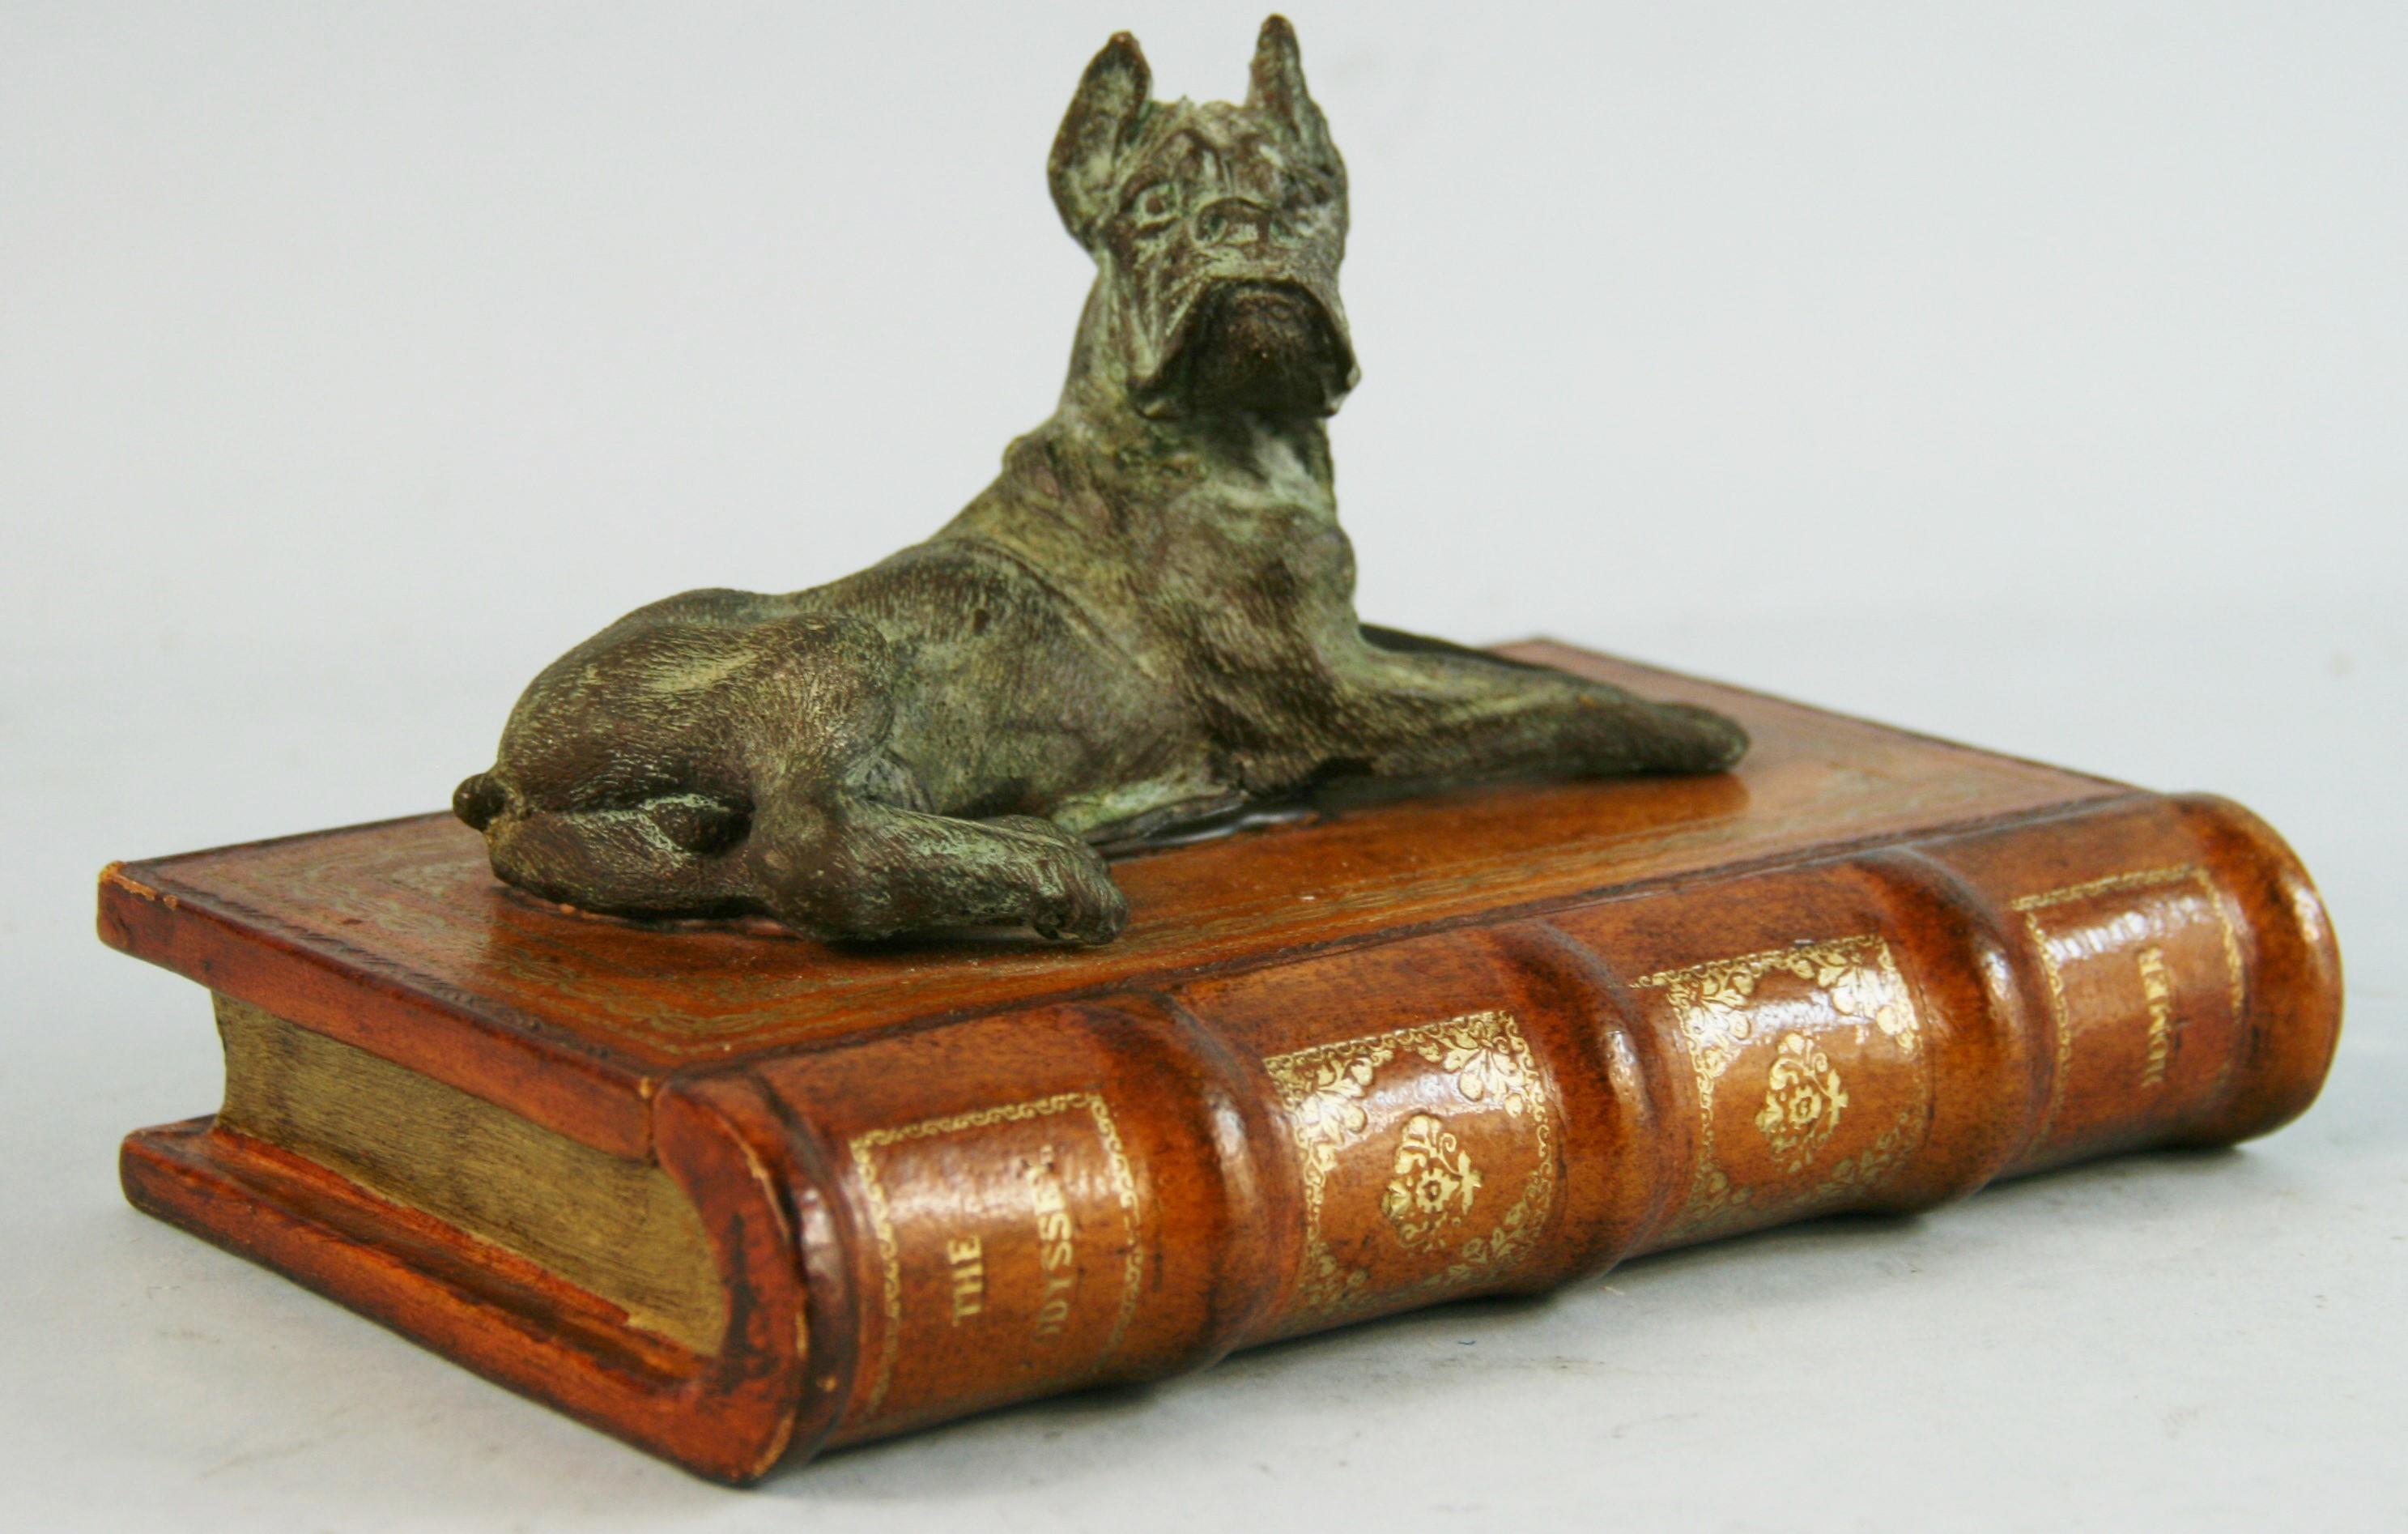 3-751 Italian leather bound book box with cast brass boxer dog as handle.
Beautiful and quirky item.